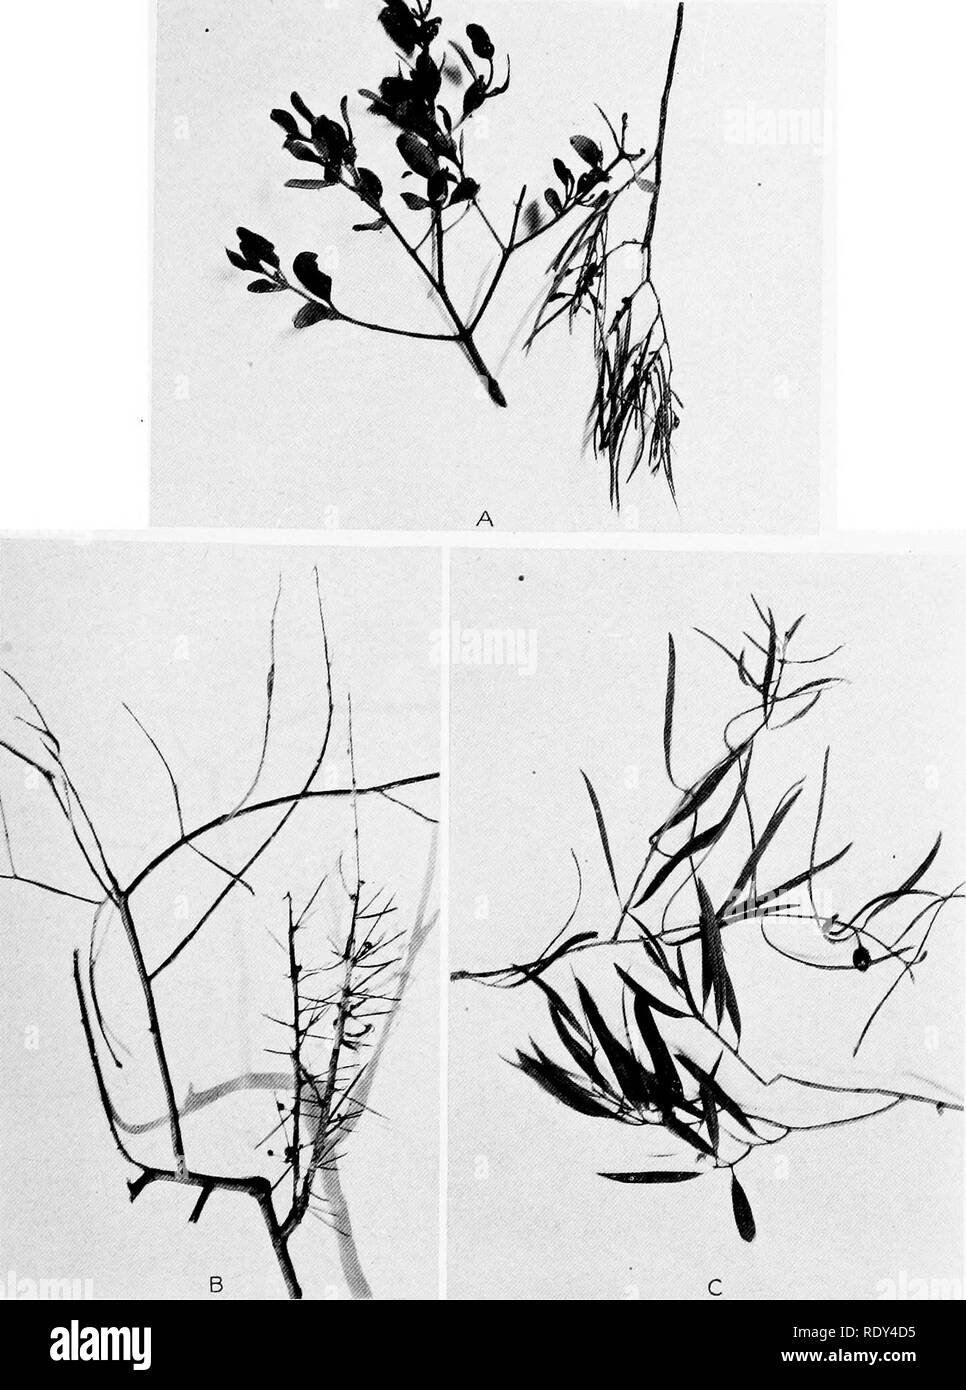 . Plant habits and habitats in the arid portions of South Australia. Plant ecology; Botany; Desert plants. CANNON PLATE 18. A. Loranthus guandang, mth oval leaves, and the narrow-leaved form of Acacia aneura, the &quot;mulga,&quot; its host. From Mount Series road, east of Copley. B. Loranthus linearifolius on Acacia tetragonophylla. The host is shown with chajacteristic spine-hke phyllodia. Copley. C. Loranthus excarpi, with leaves and fruit and shoot-tip of its host, Myoporum platycarpum. Copley.. Please note that these images are extracted from scanned page images that may have been digital Stock Photo